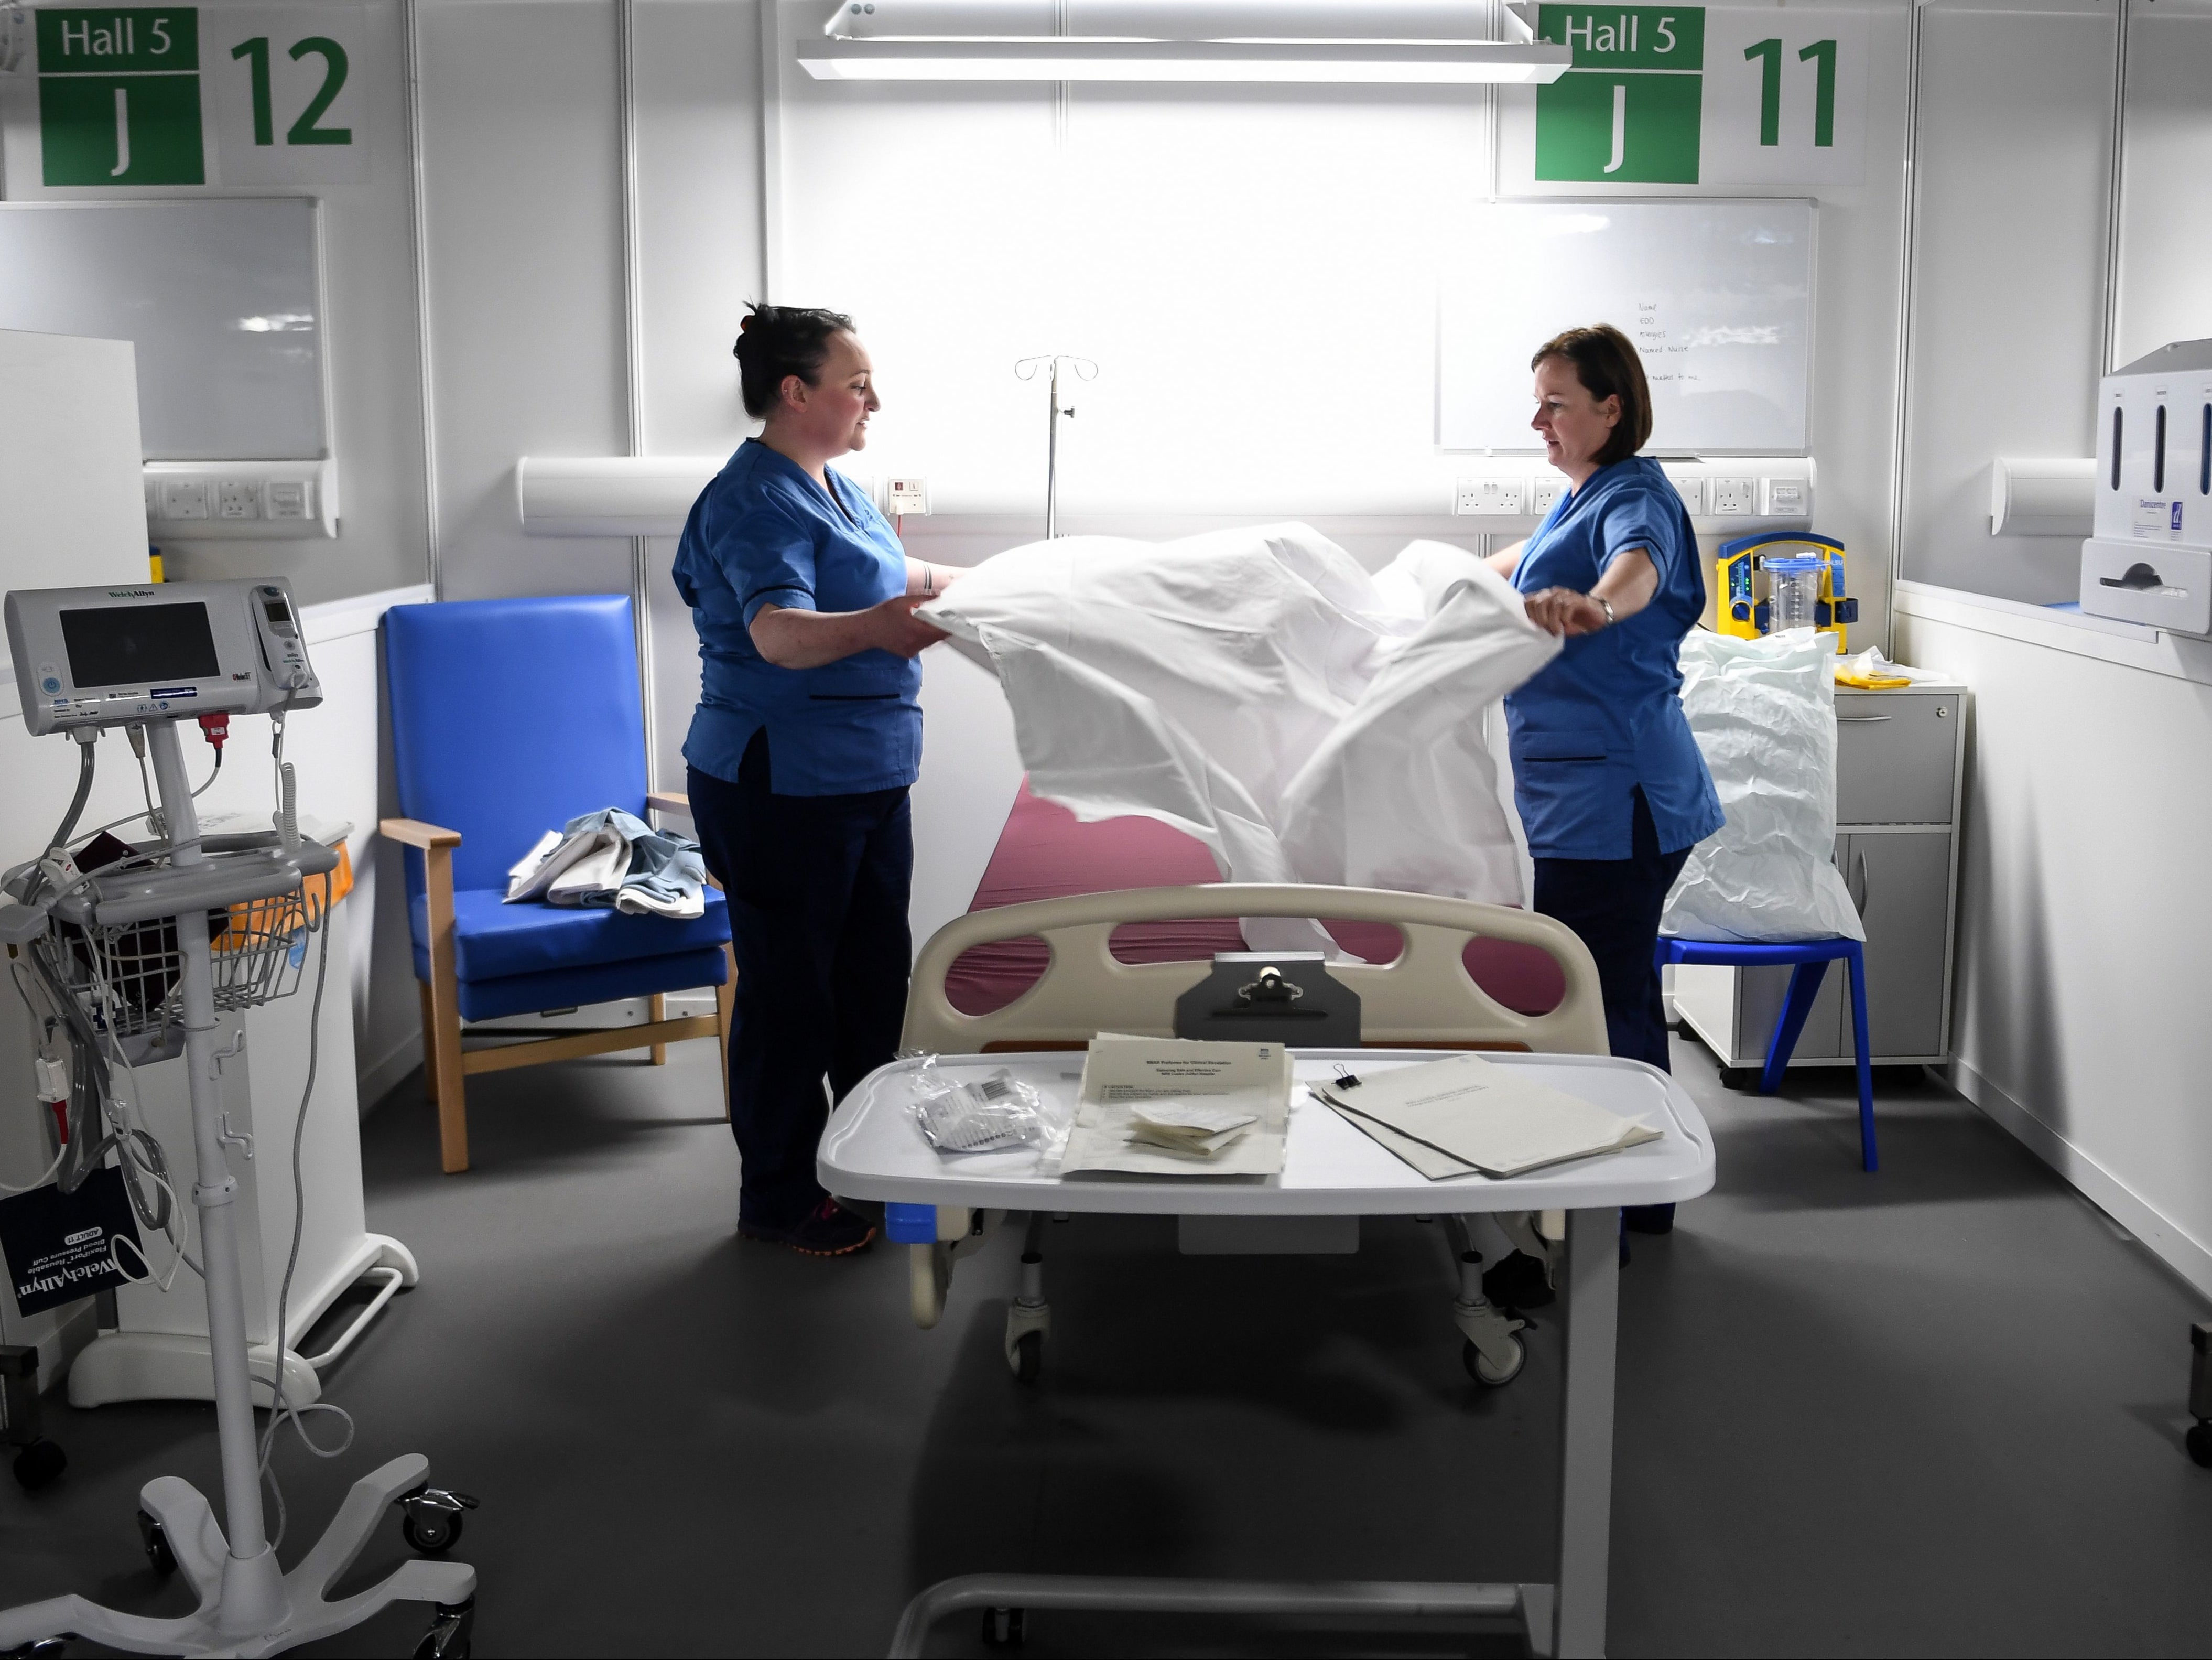 NHS staff have been told to ‘only change linen if essential’